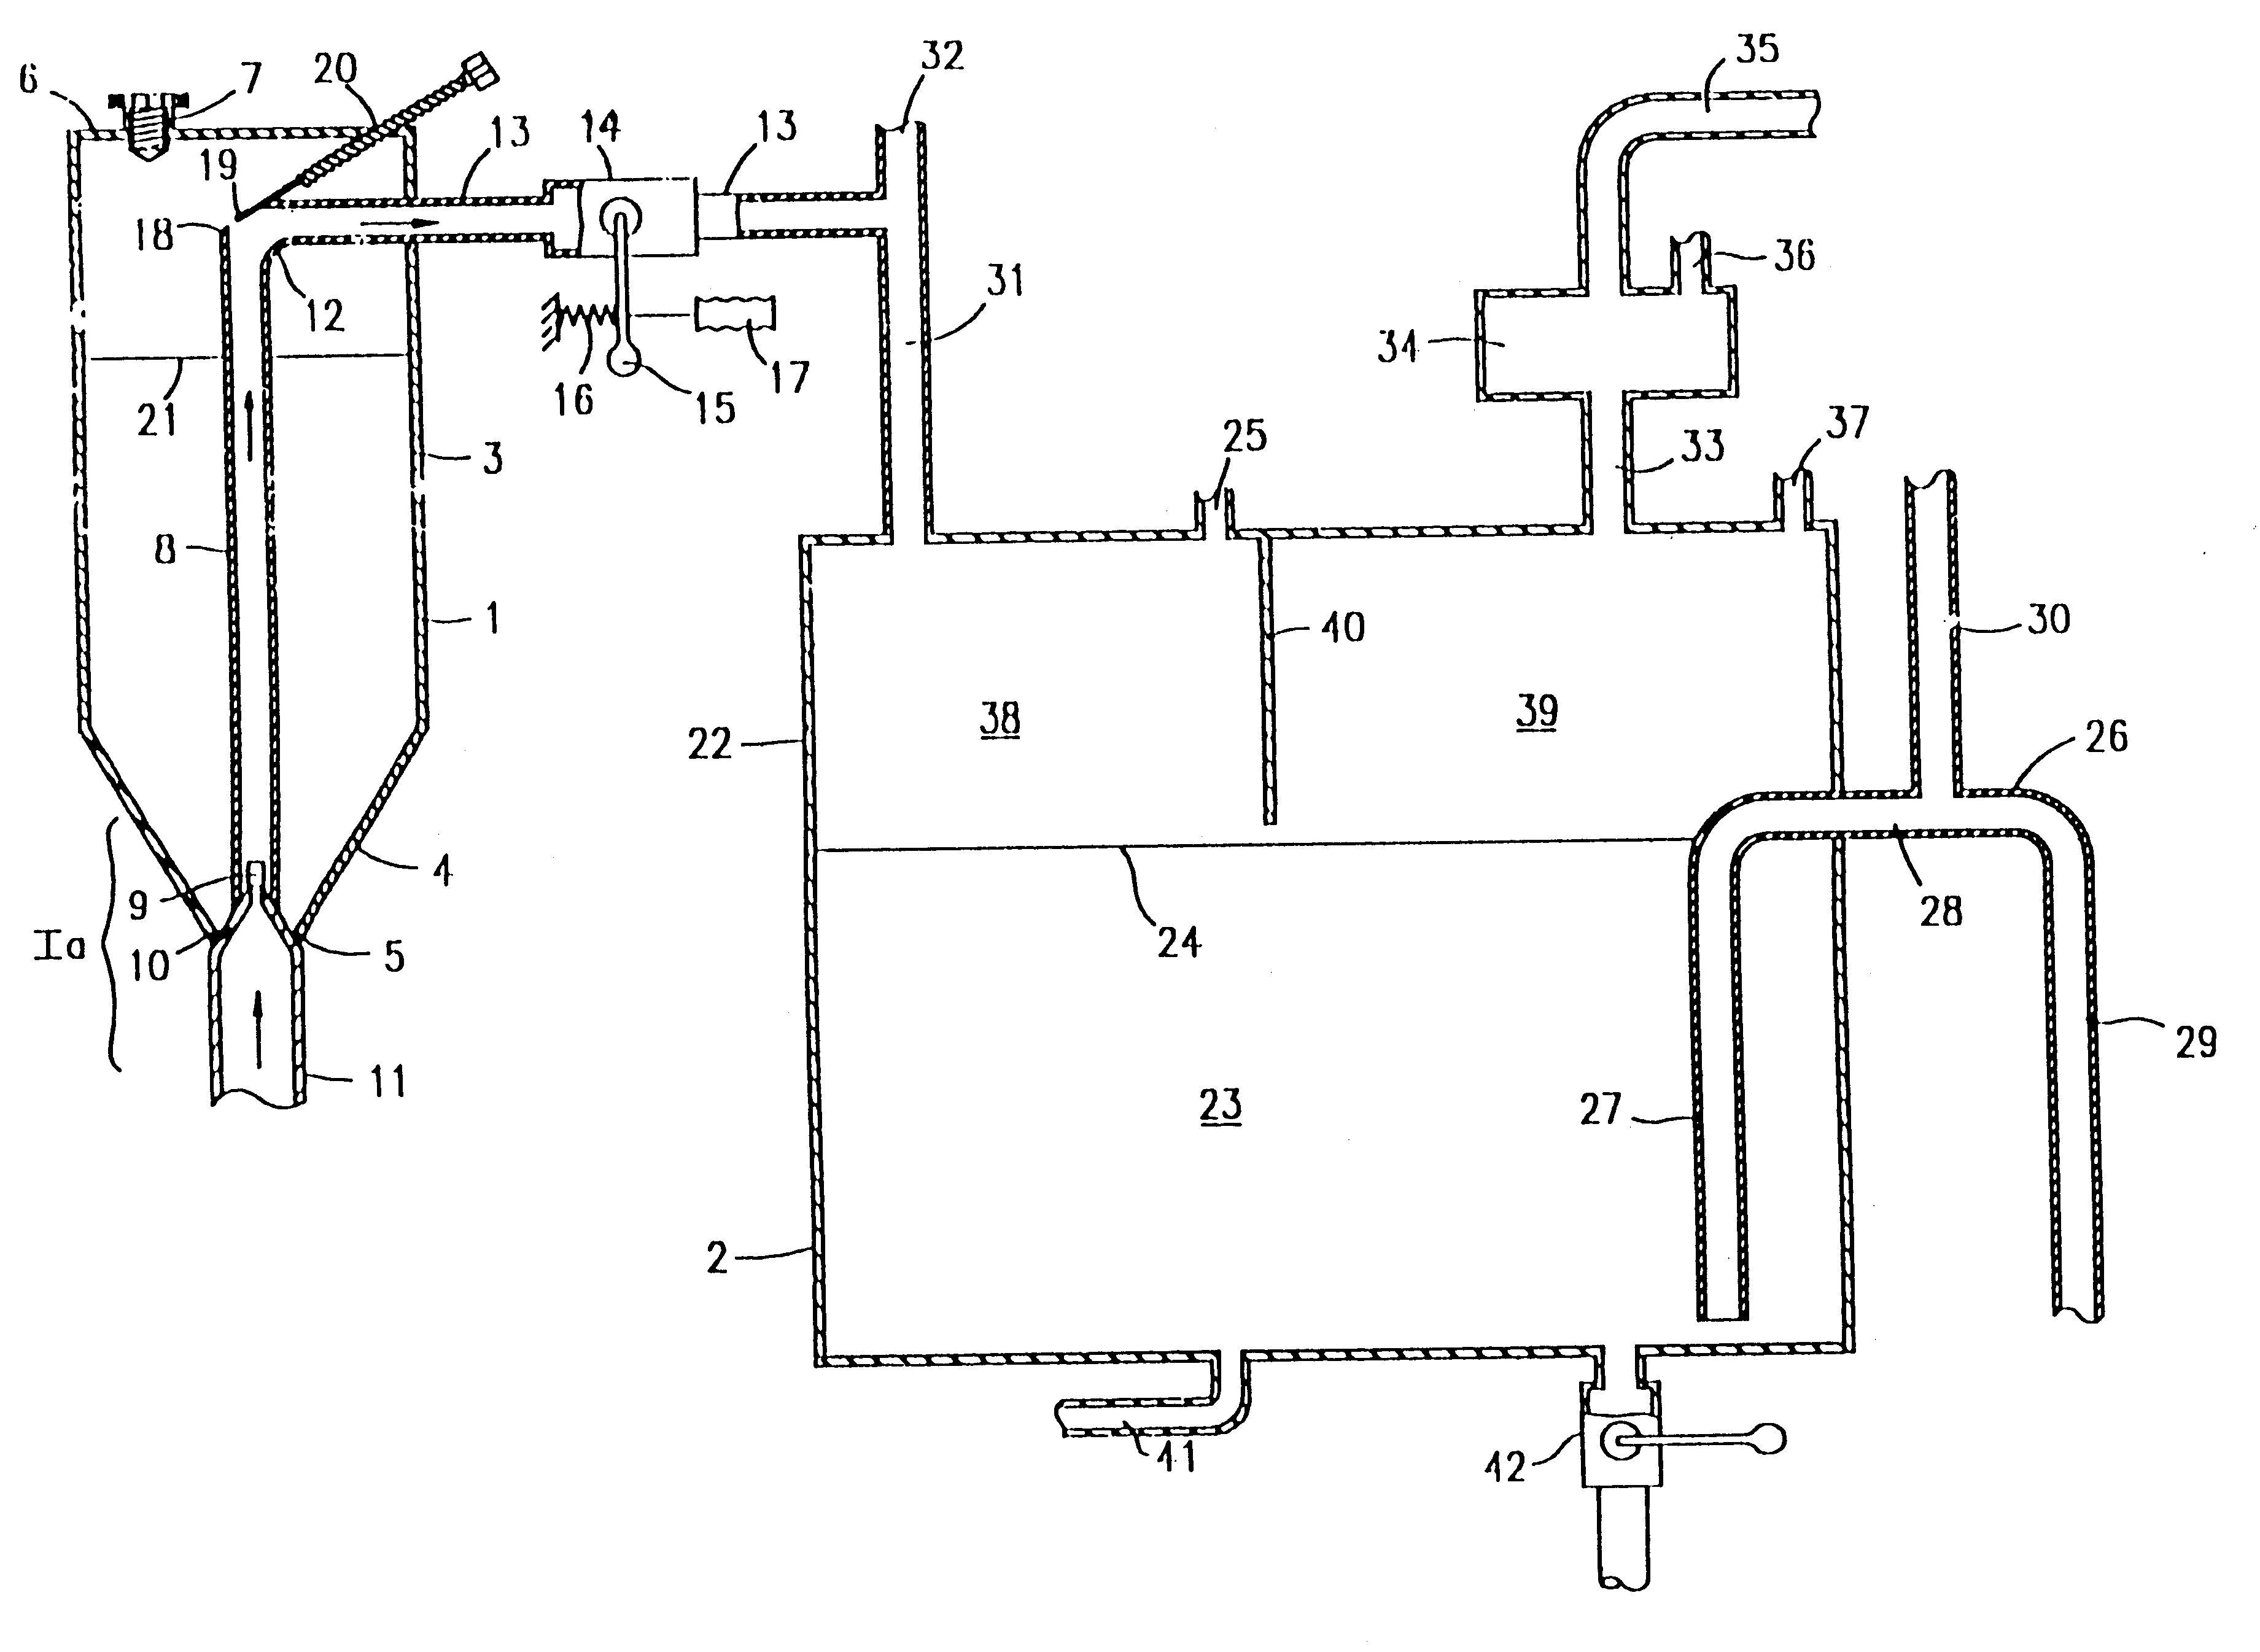 Phosphine generator for producing phosphine-containing gas